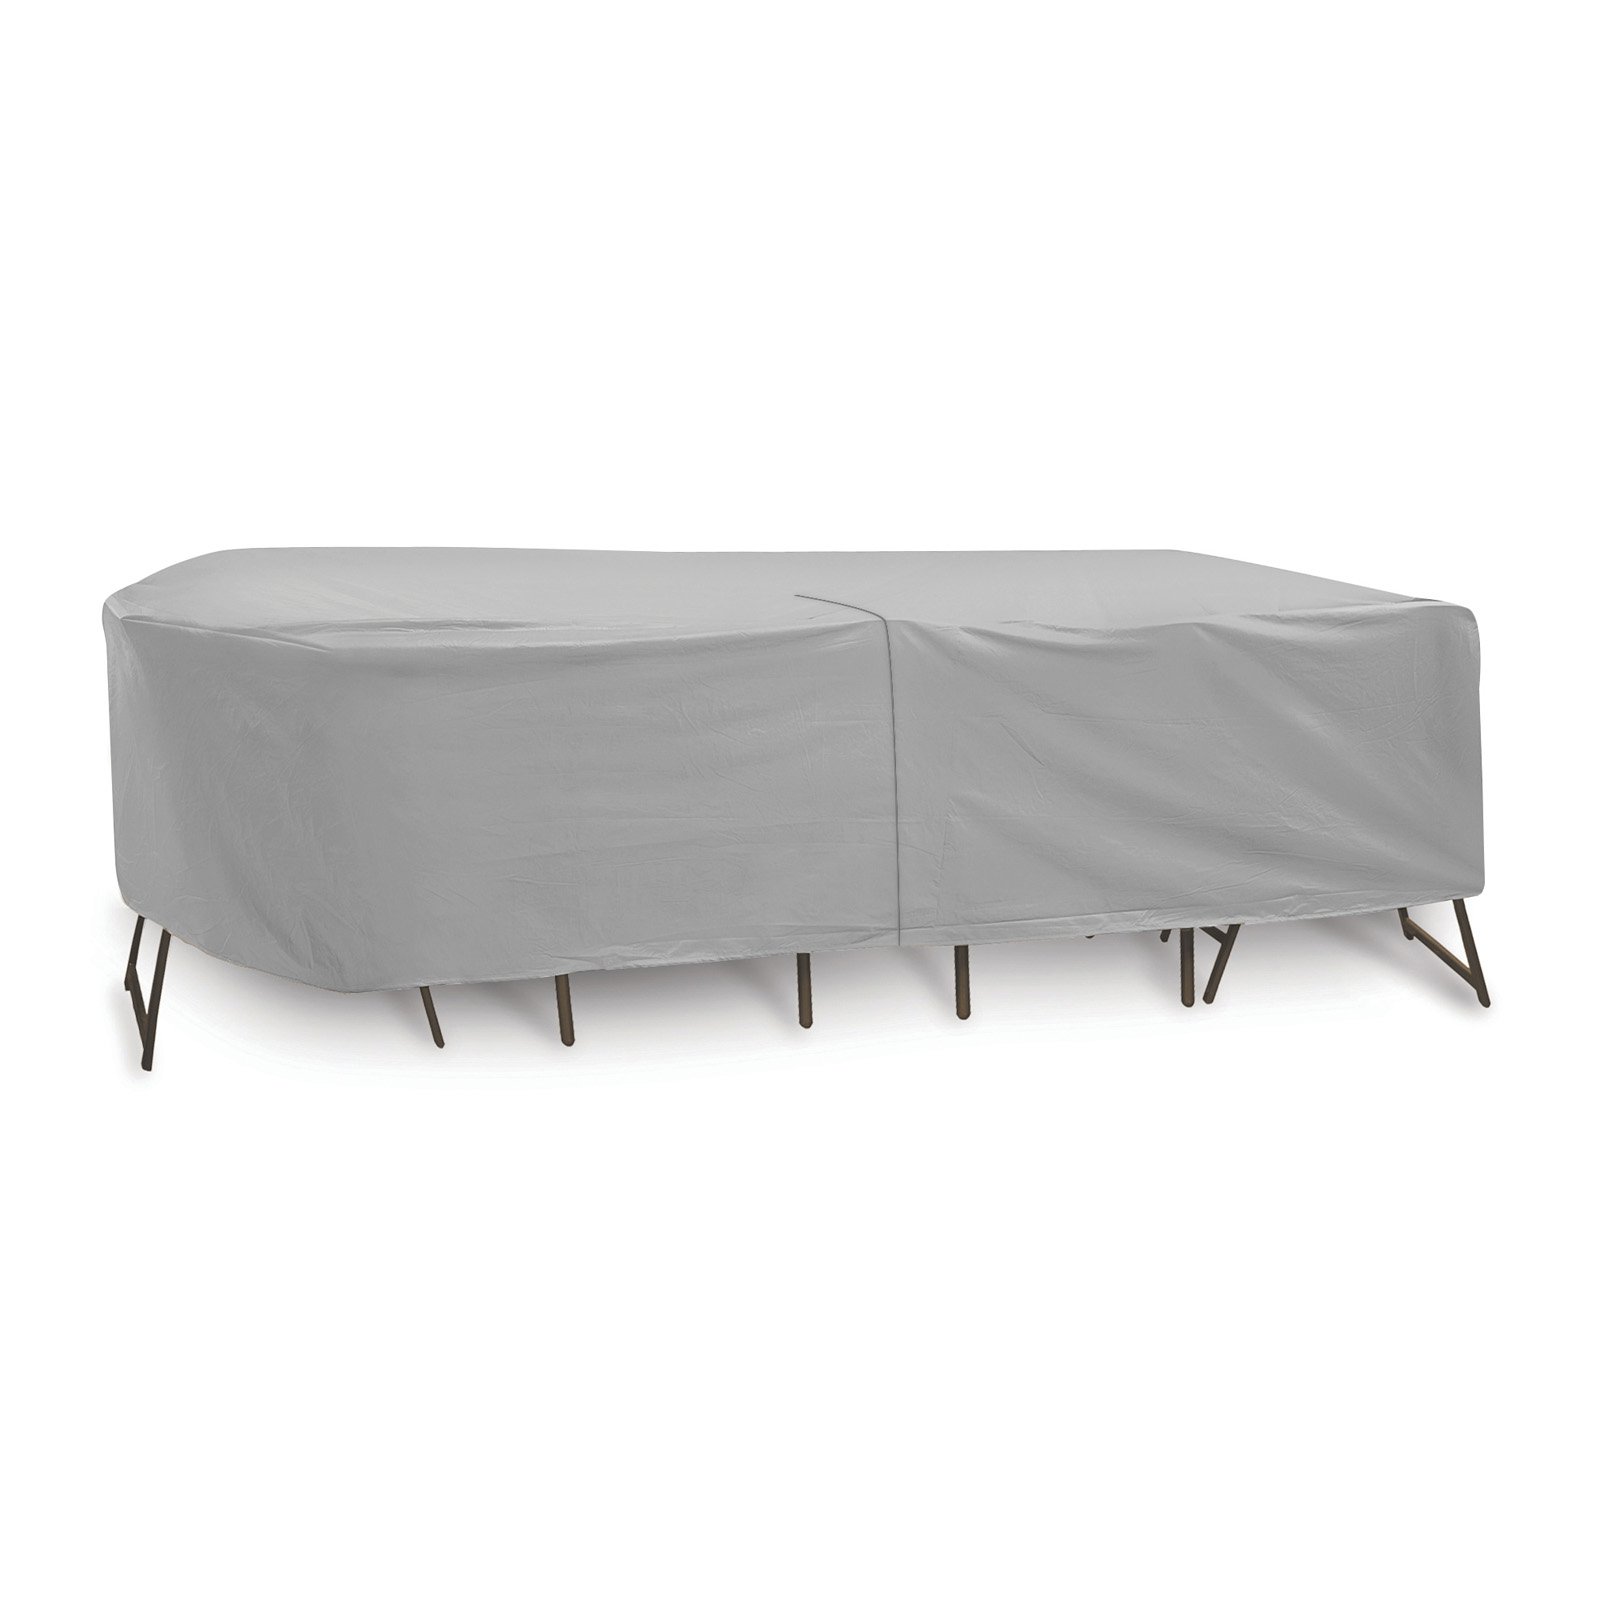 Oval/Rect Table & Chair Cover for 60"-66" table with 6 High Back Chairs, 30" height - image 1 of 3